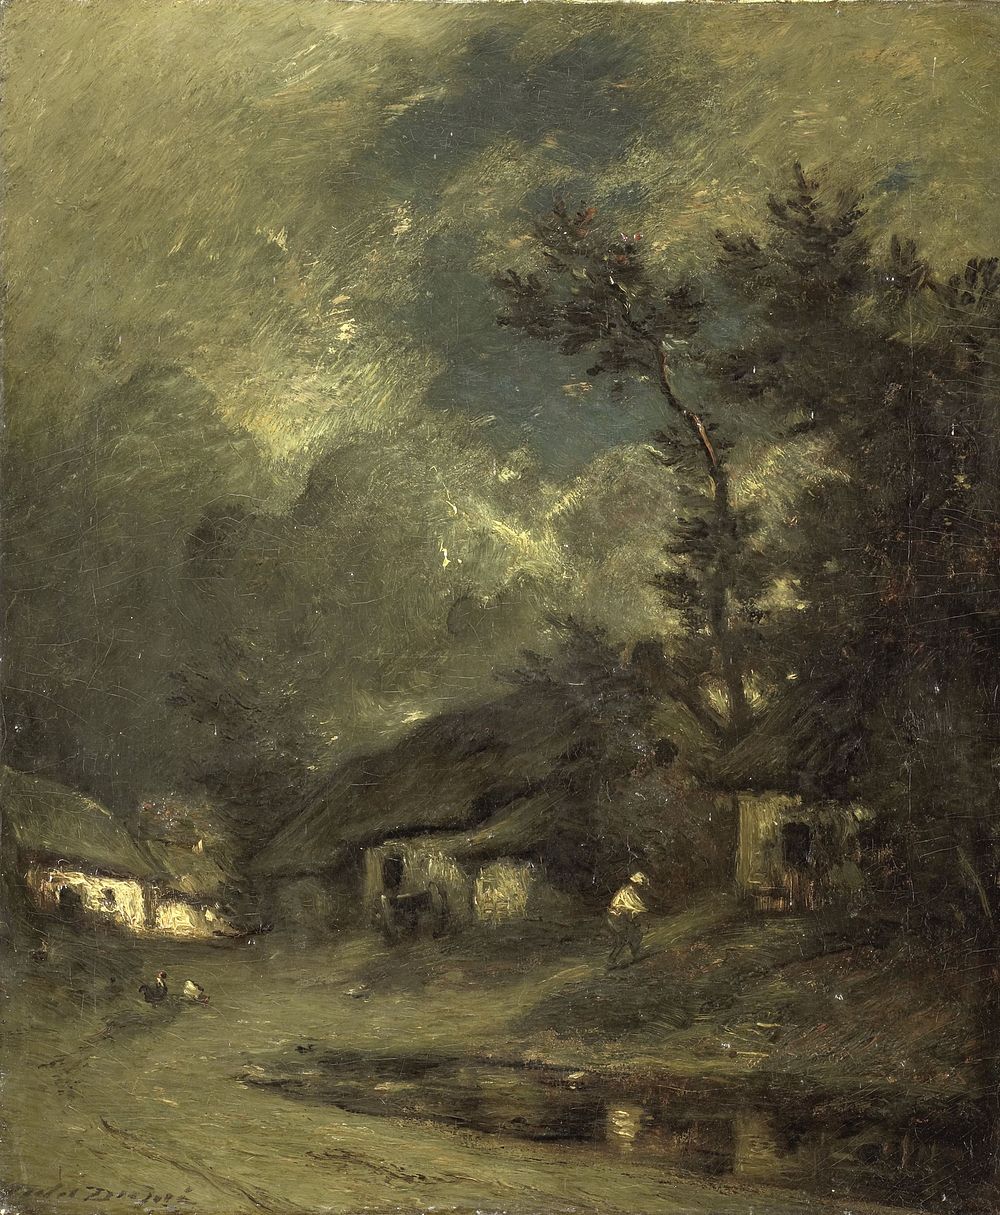 A Village by Night (1840 - 1889) by Jules Dupré